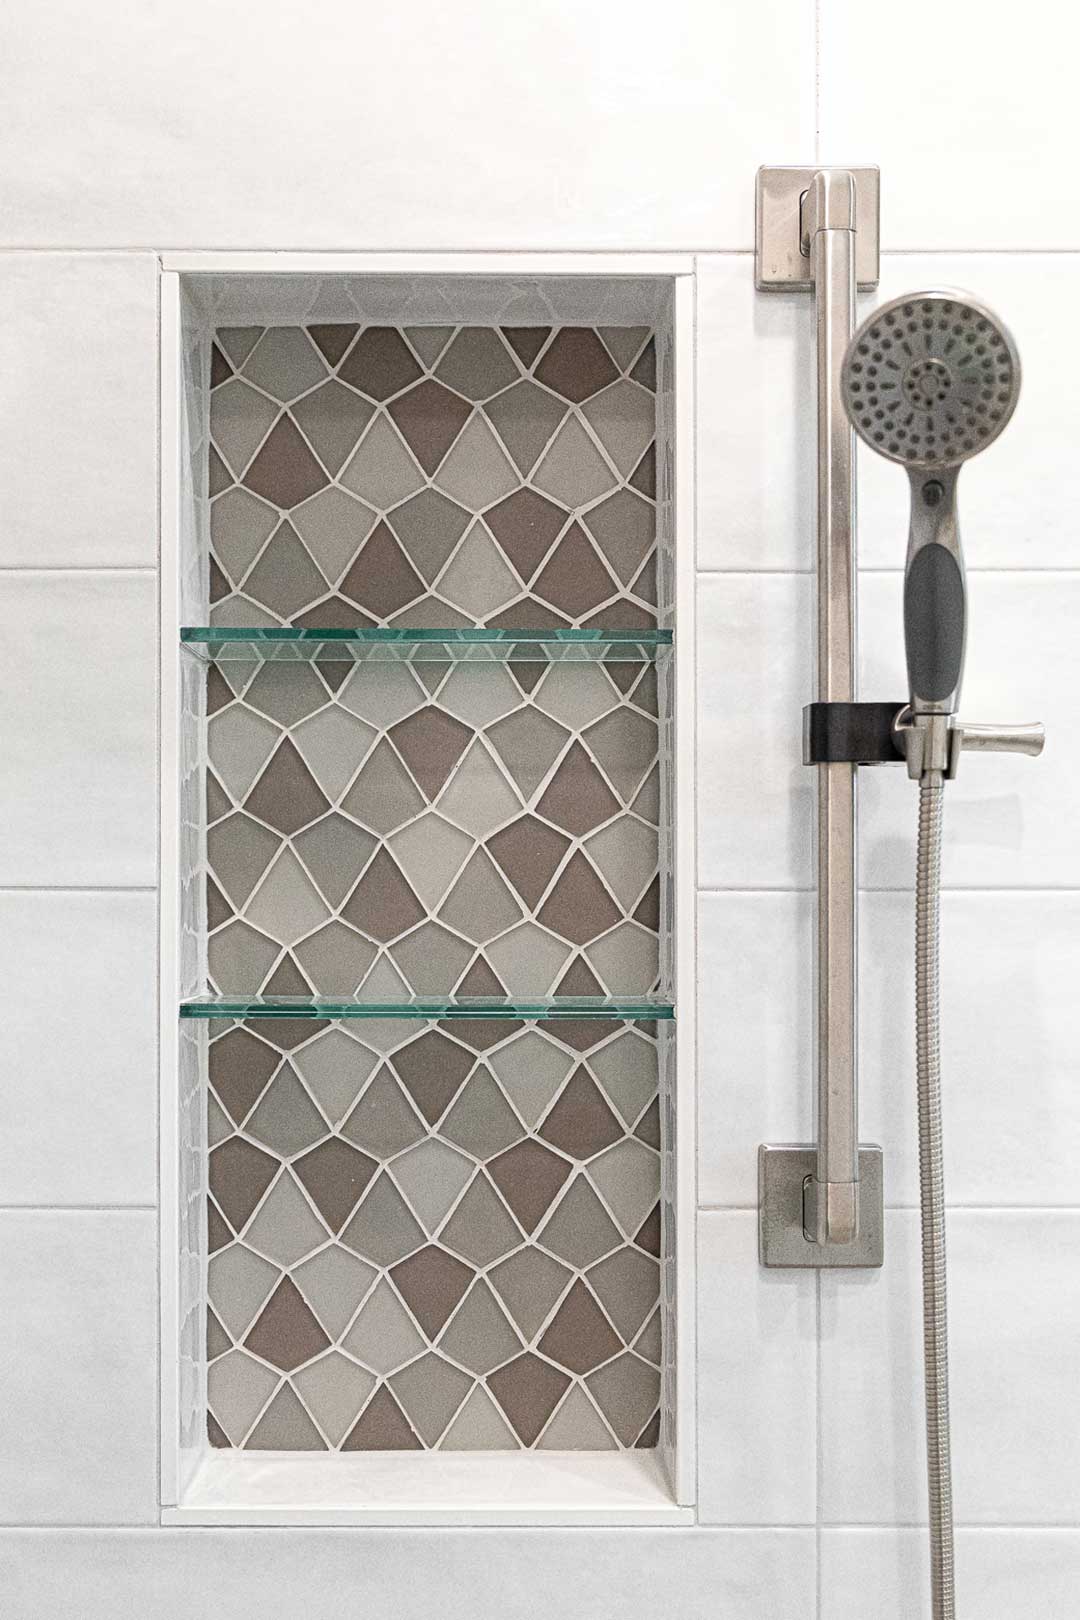 Detailed image of the modern shower rail and custom tiled shower niche installed by Freestone Design-Build